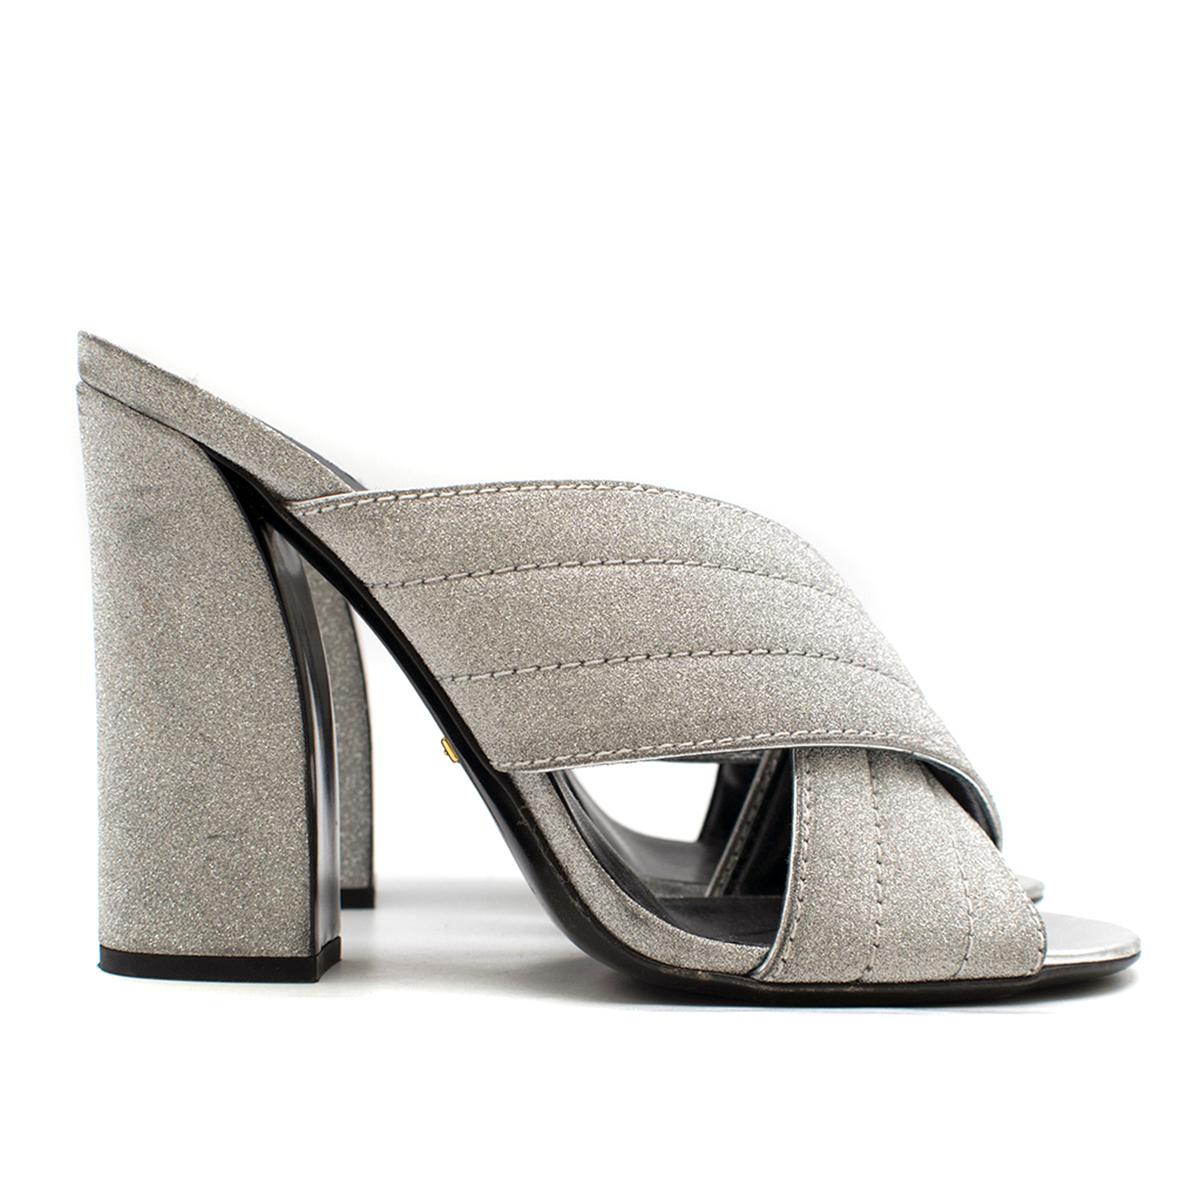 Gucci Webby Metallic Silver Mules

- 'Webby' Metallic Silver Mules
- Covered curved block heel 
- Quilted CrissCross vamp strap at front 
- Open toe, Slide style.
- Leather 
- Padded leather insole printed with gold-tone foil branding

Please note,